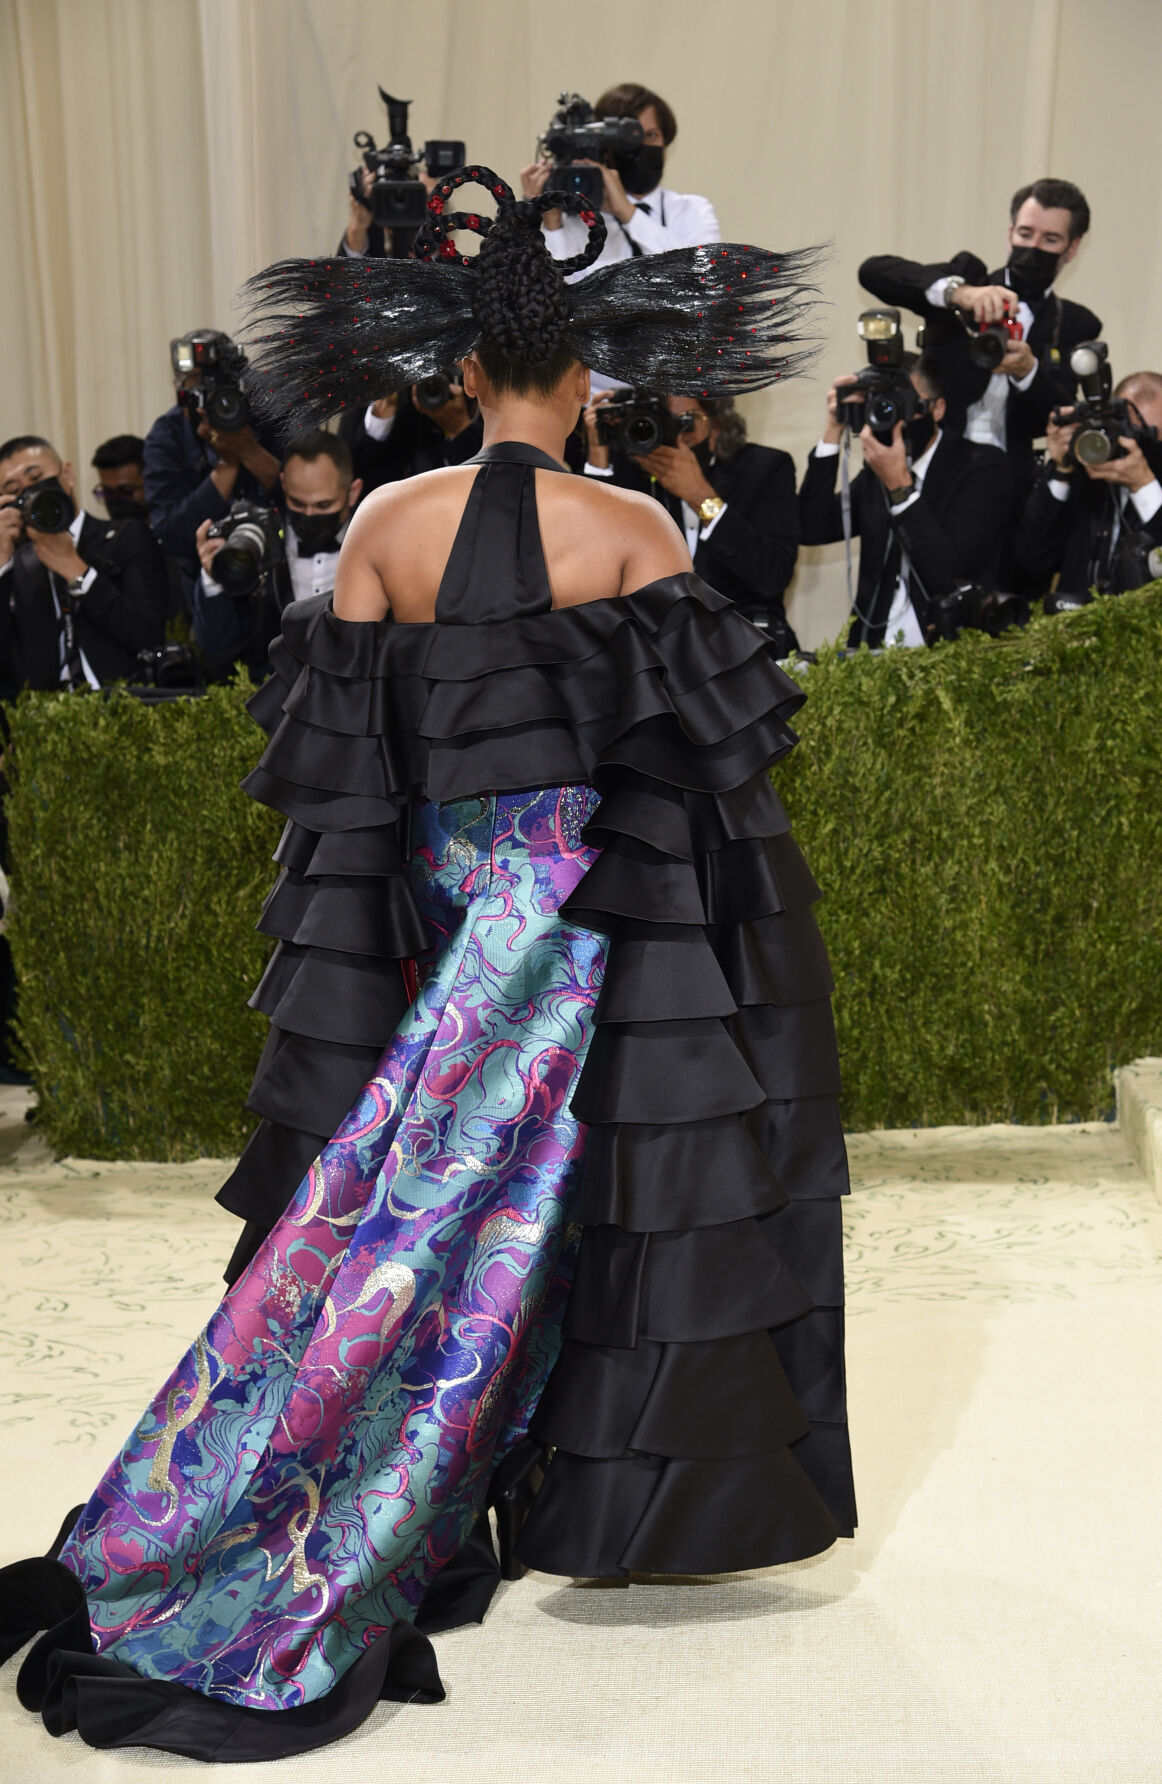 The 2022 Met Gala, Explained — Gilded Glamour Theme, Guests, Date